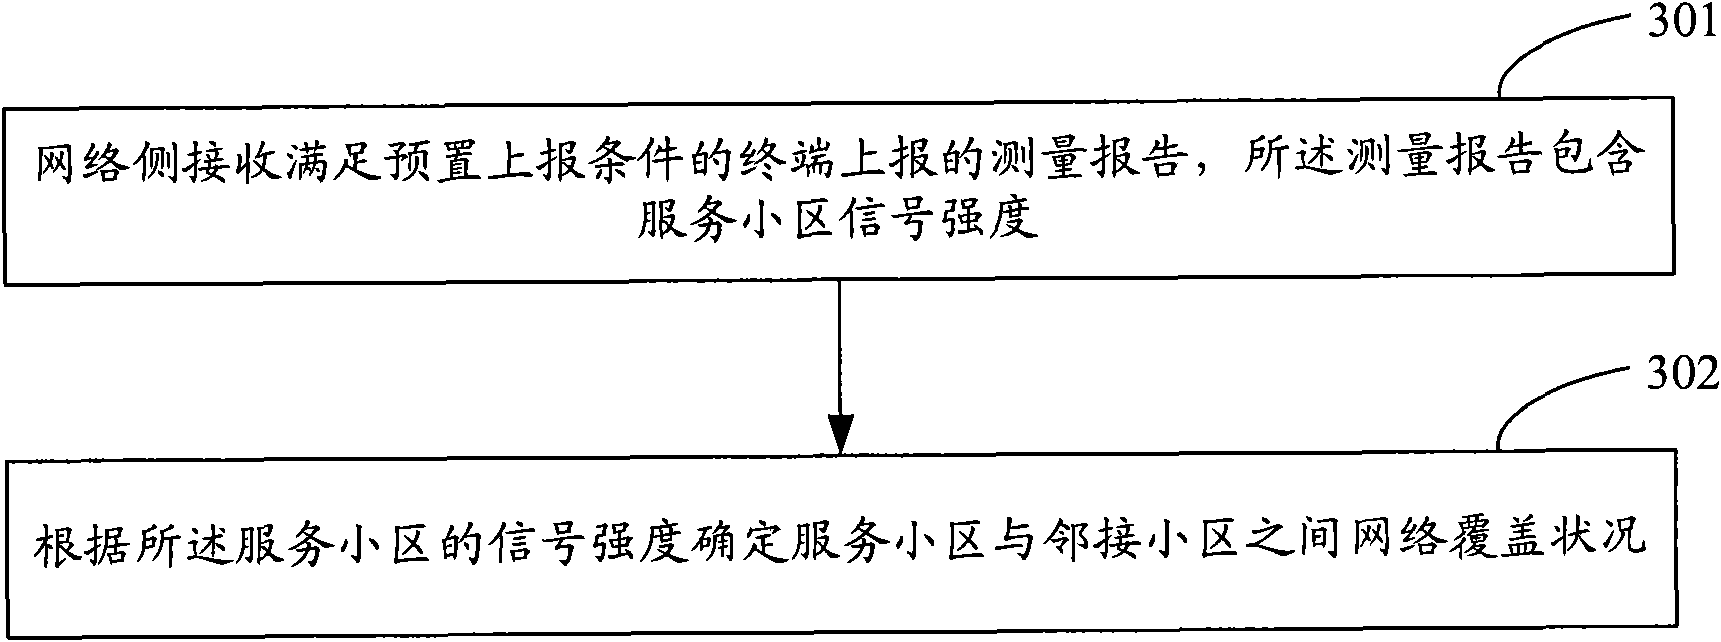 Network coverage detection method and system